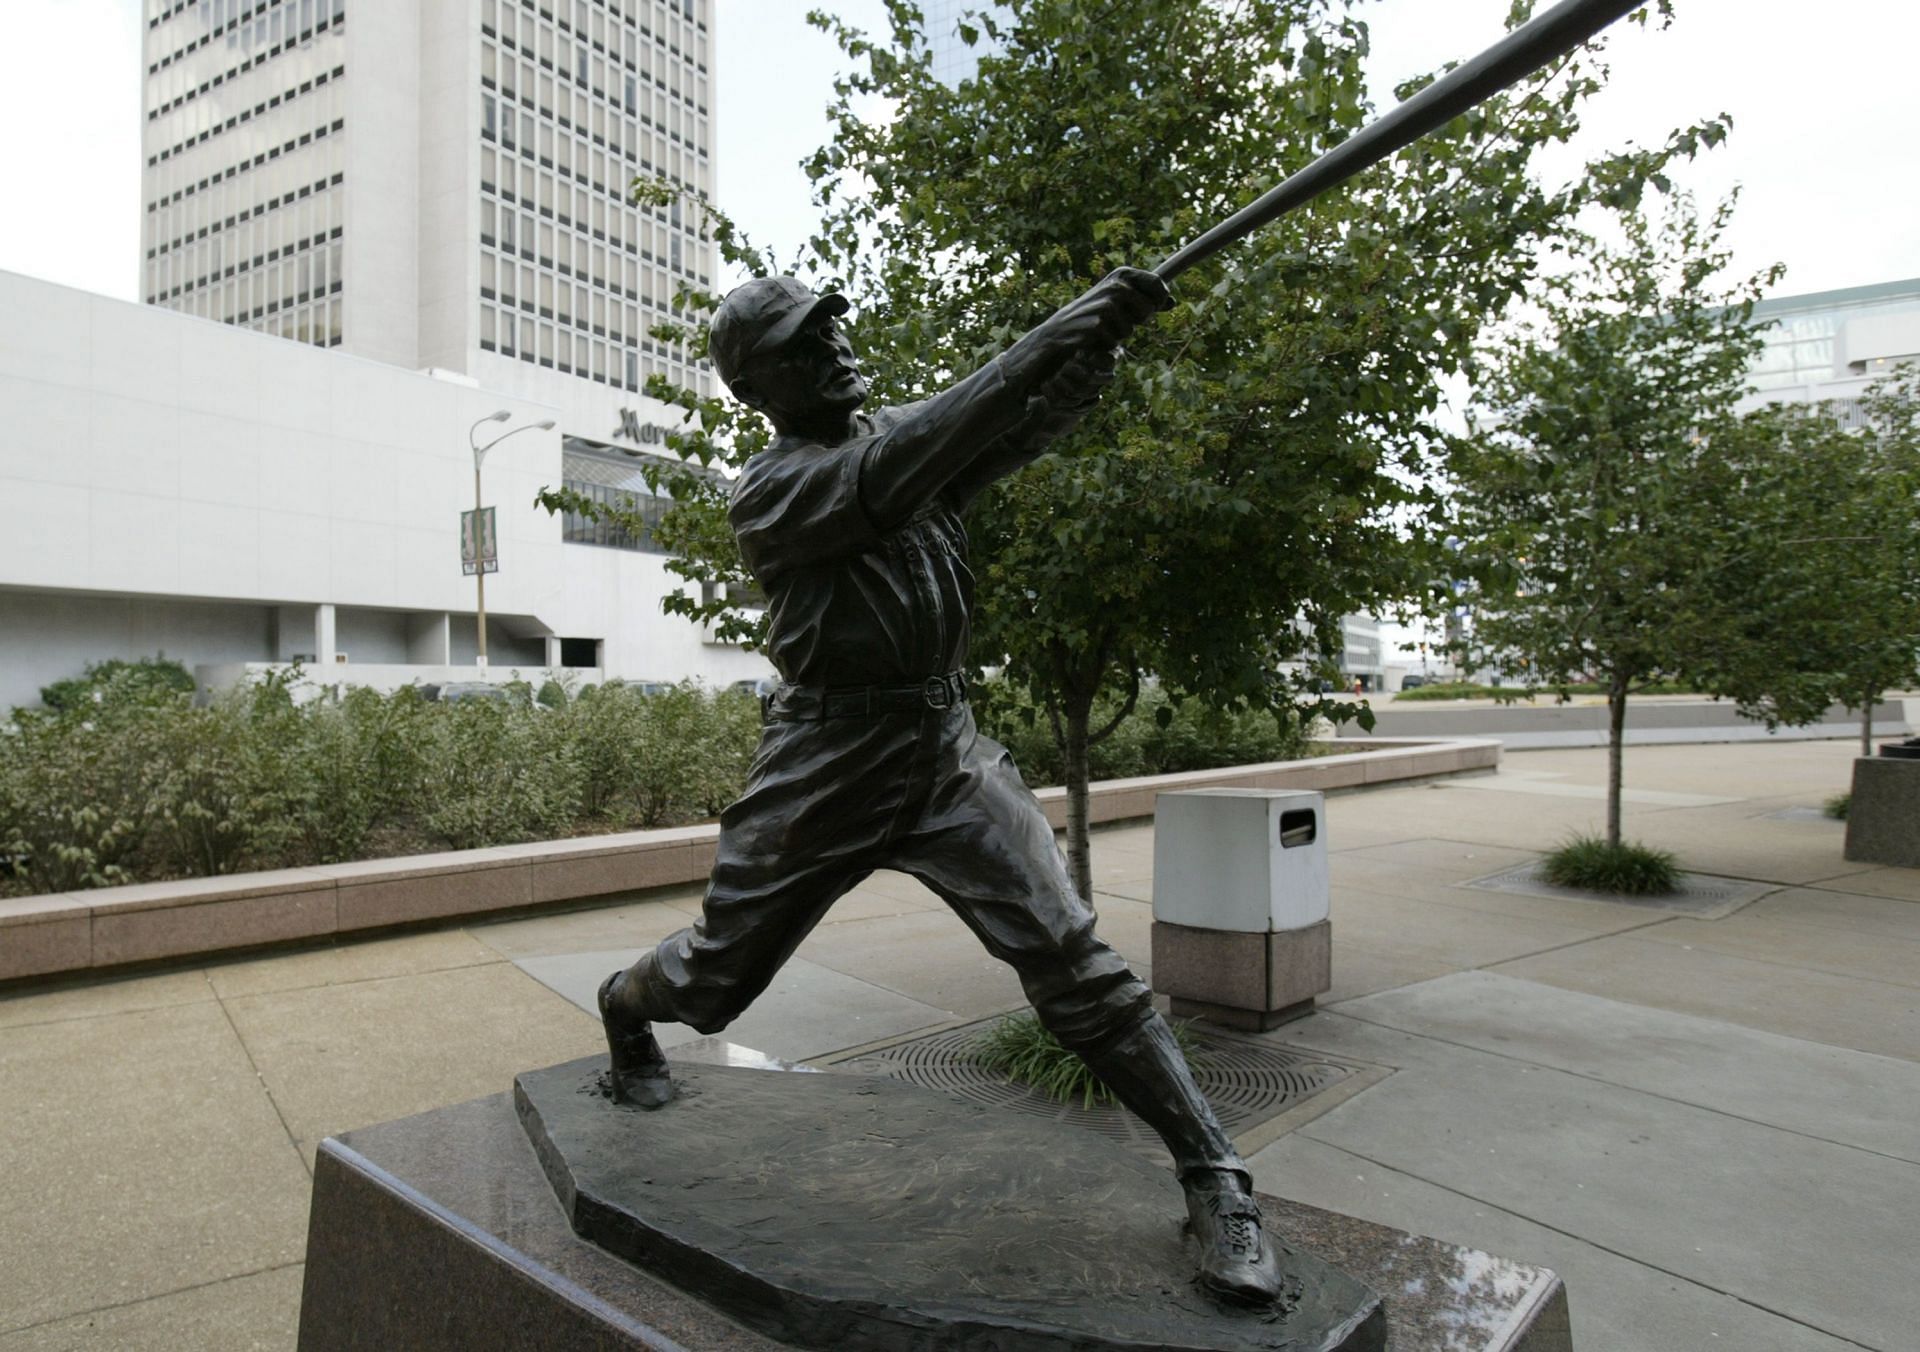 The St. Louis Cardinals erected a statue of Rogers Hornsby outside of Busch Stadium